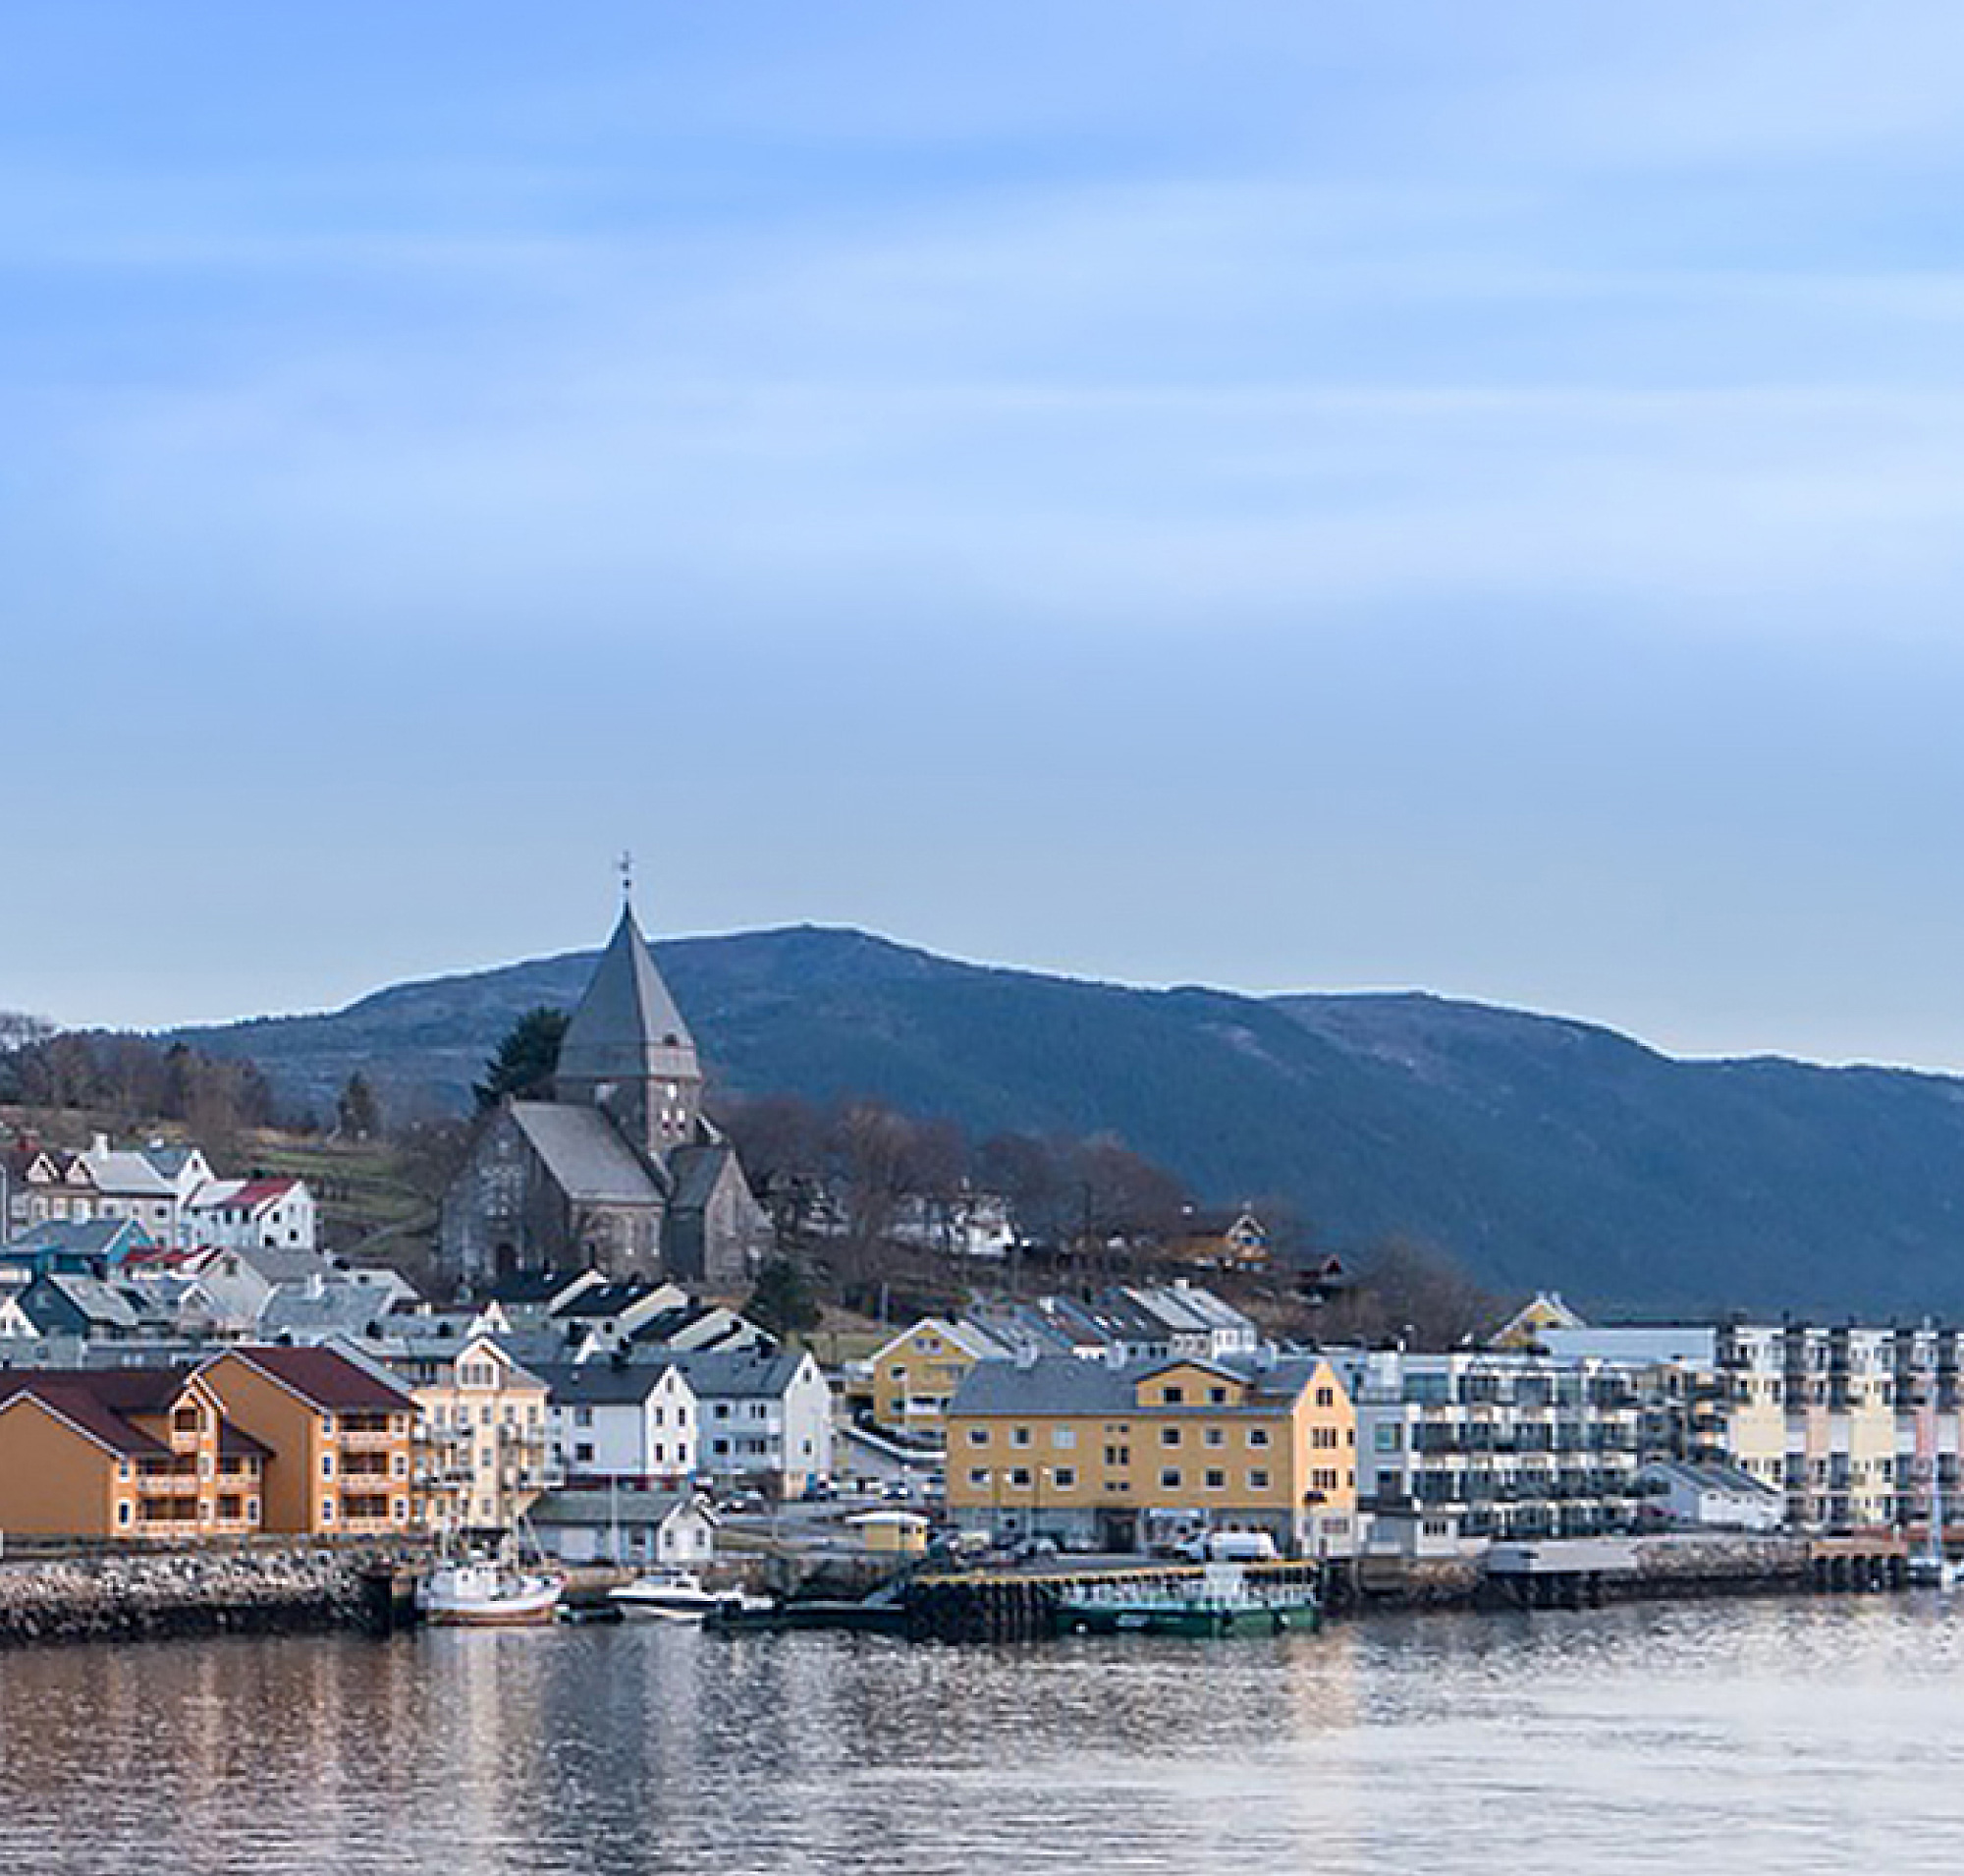 A scenic view of a coastal norwegian town with colorful buildings and a prominent church, set against a backdrop of hills 